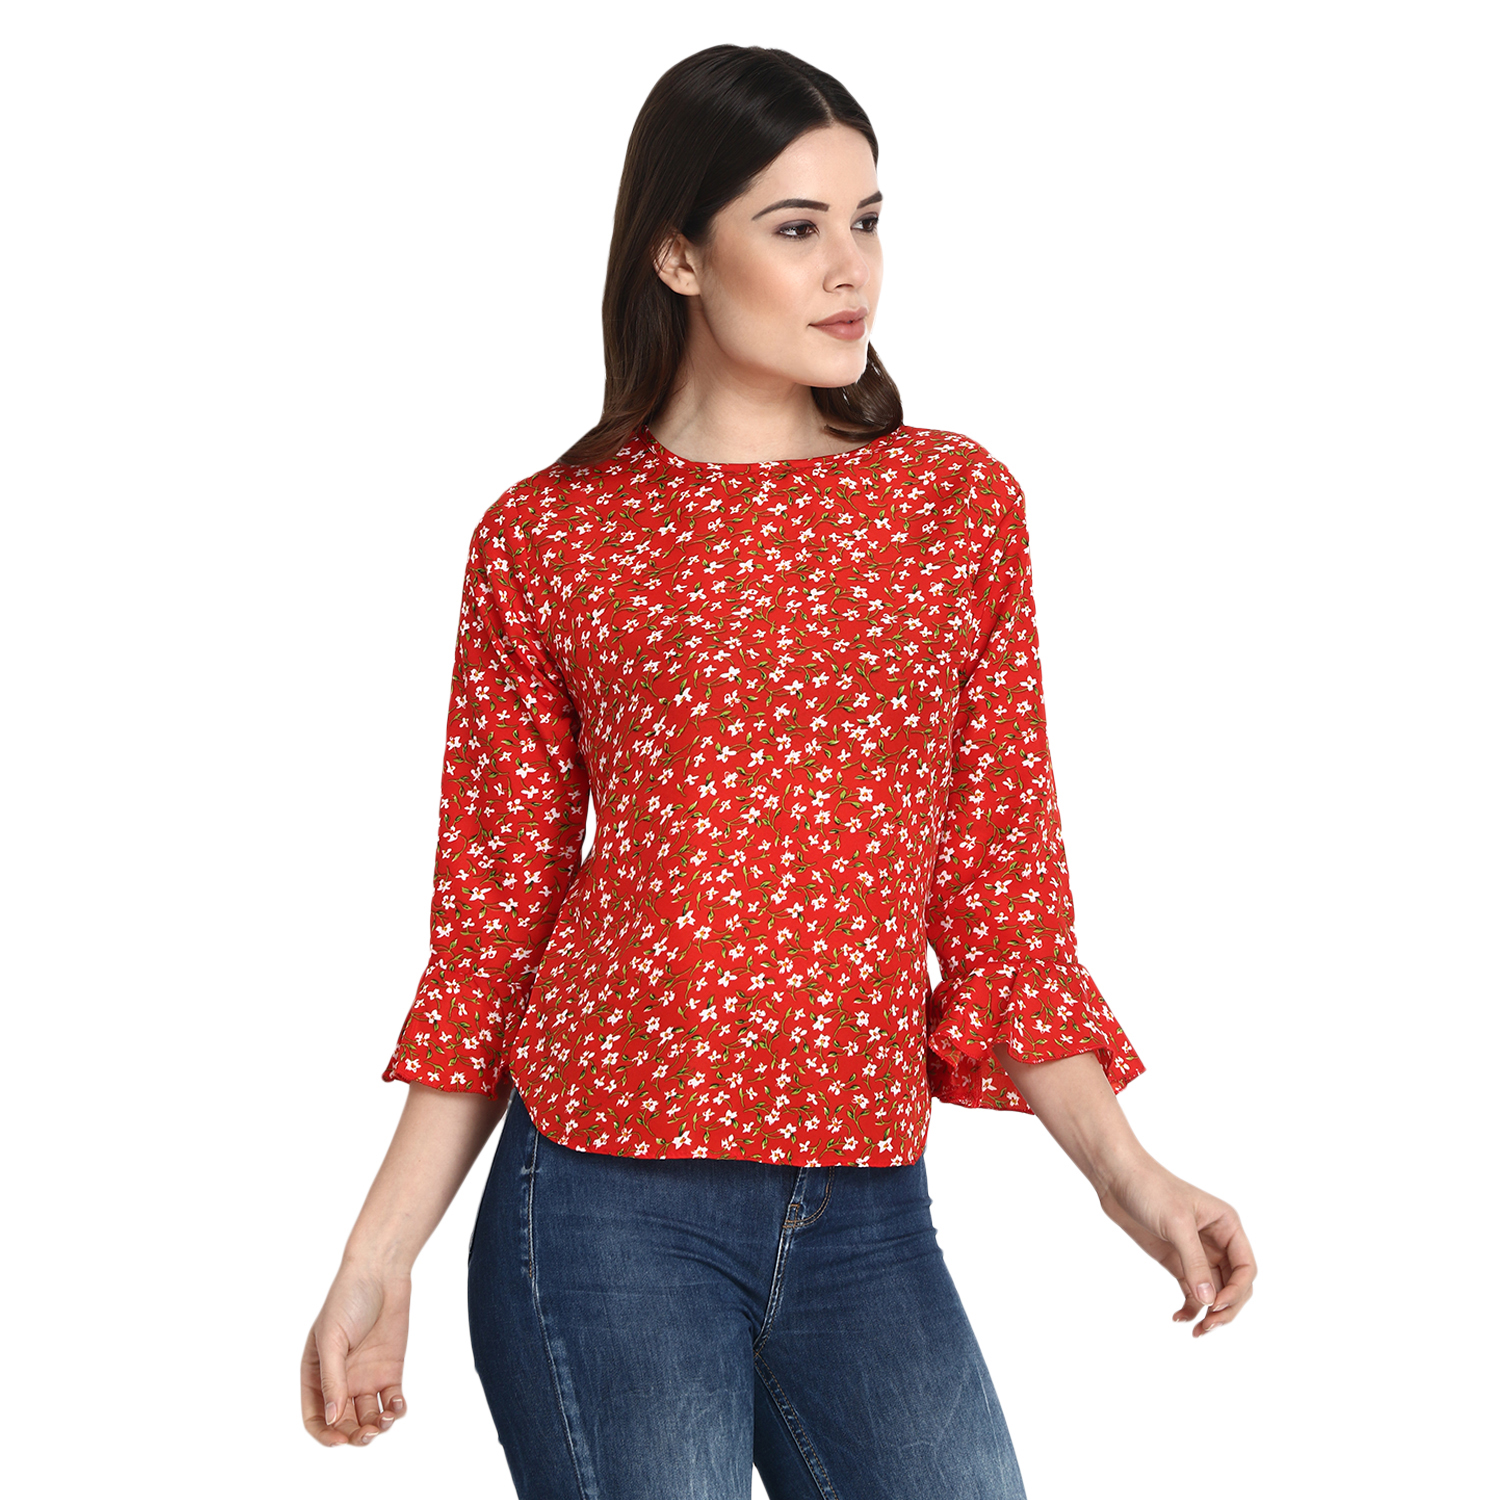 Buy Jollify Women's Polyster Red Color Top Online @ ₹299 from ShopClues